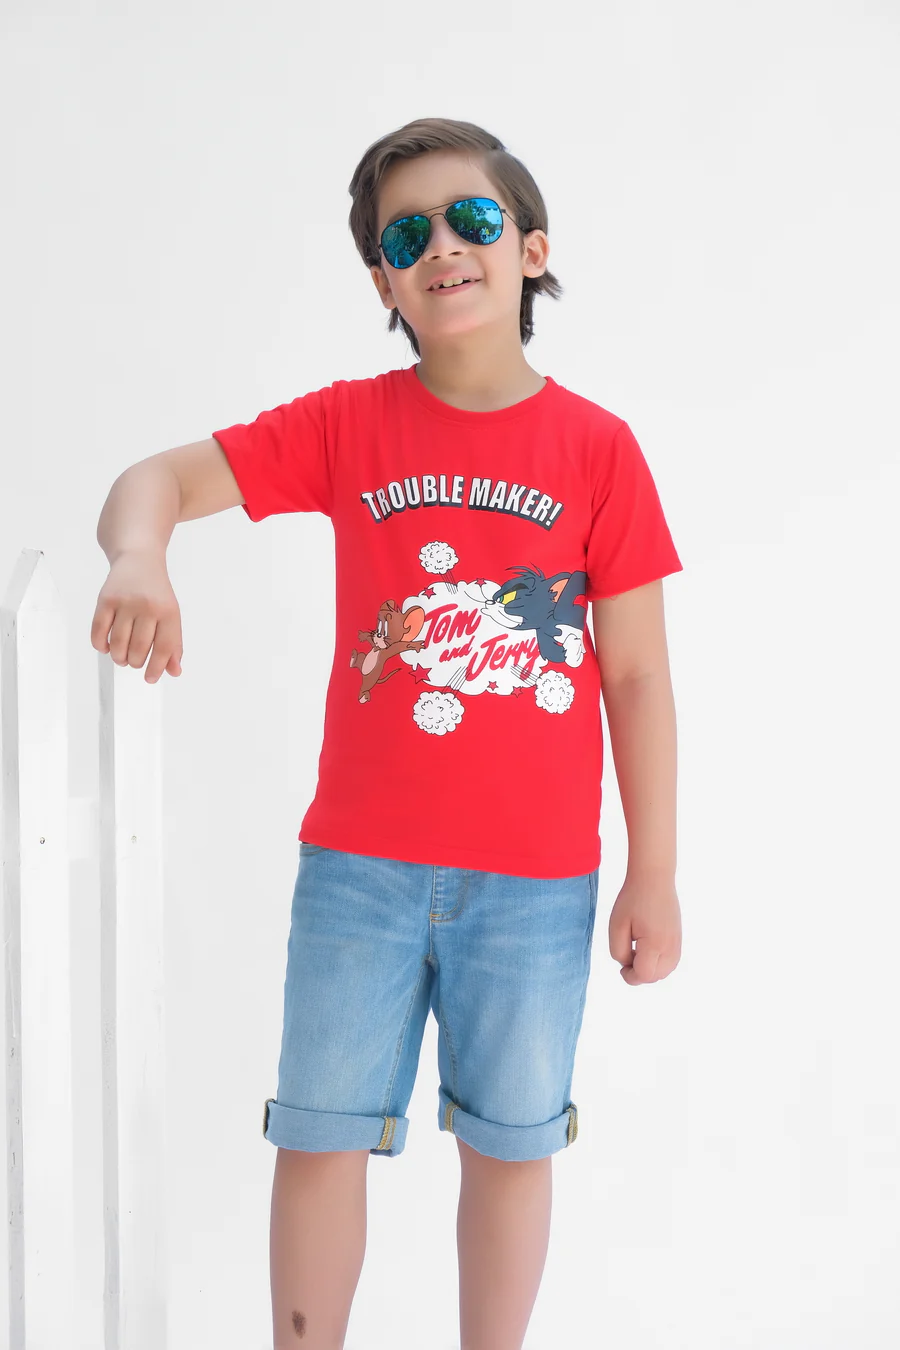 Trouble Maker - Half Sleeves T-Shirts For Kids - Red - SBT-350